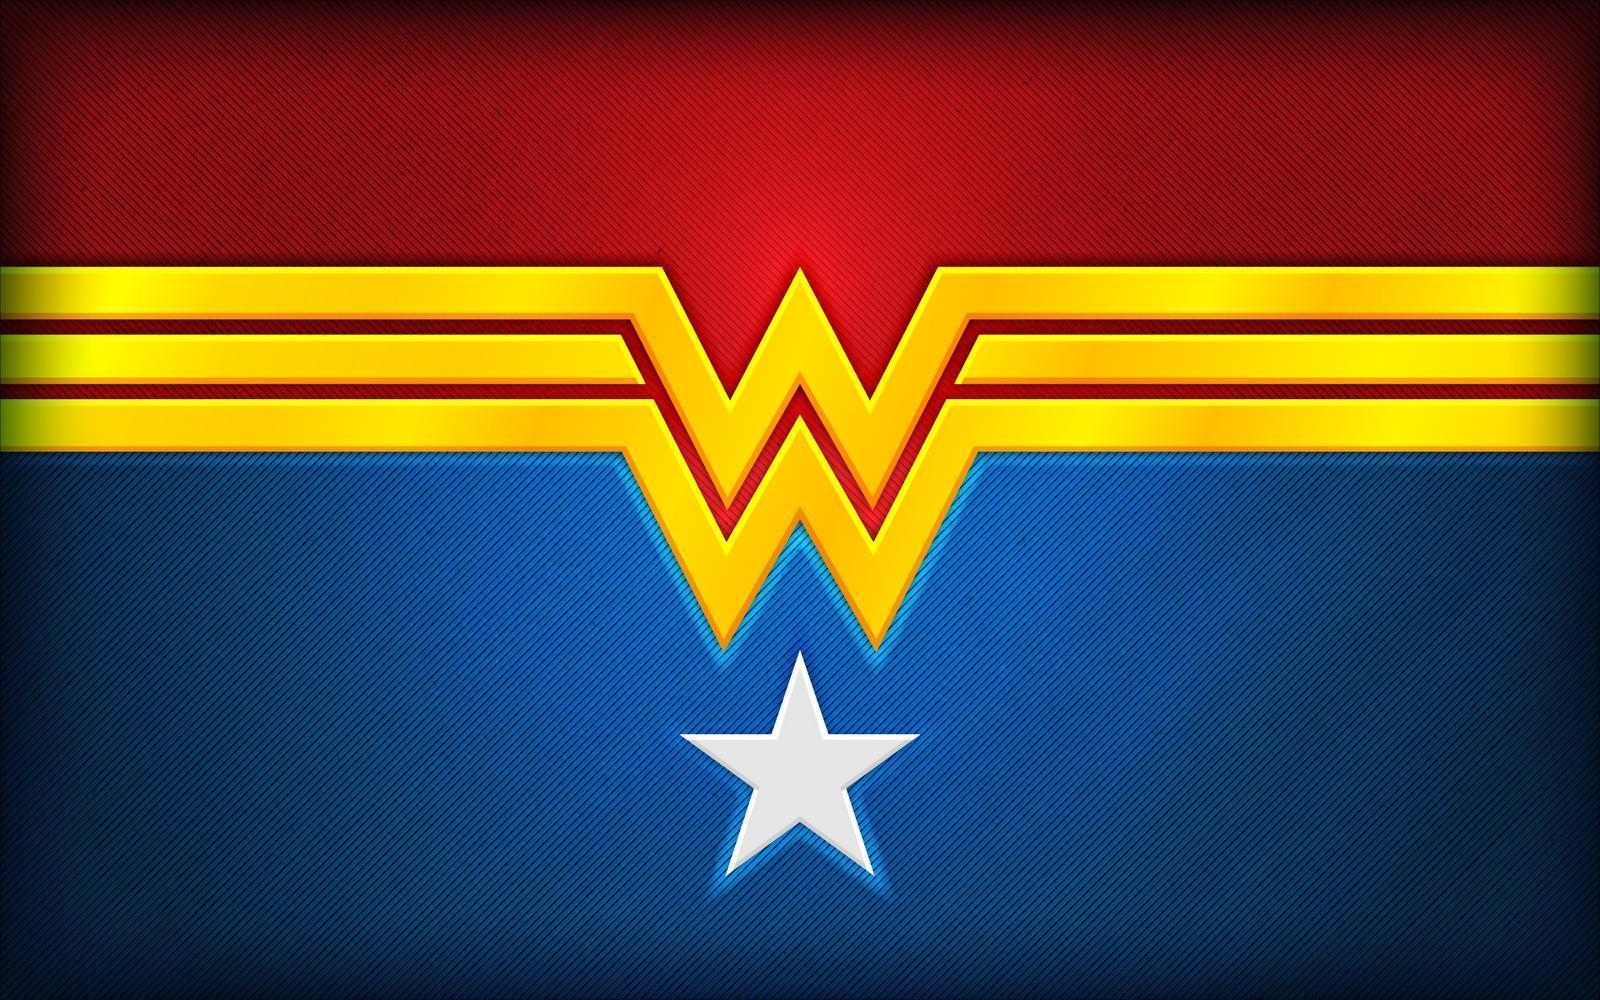 Collection Logo of Wonder Woman